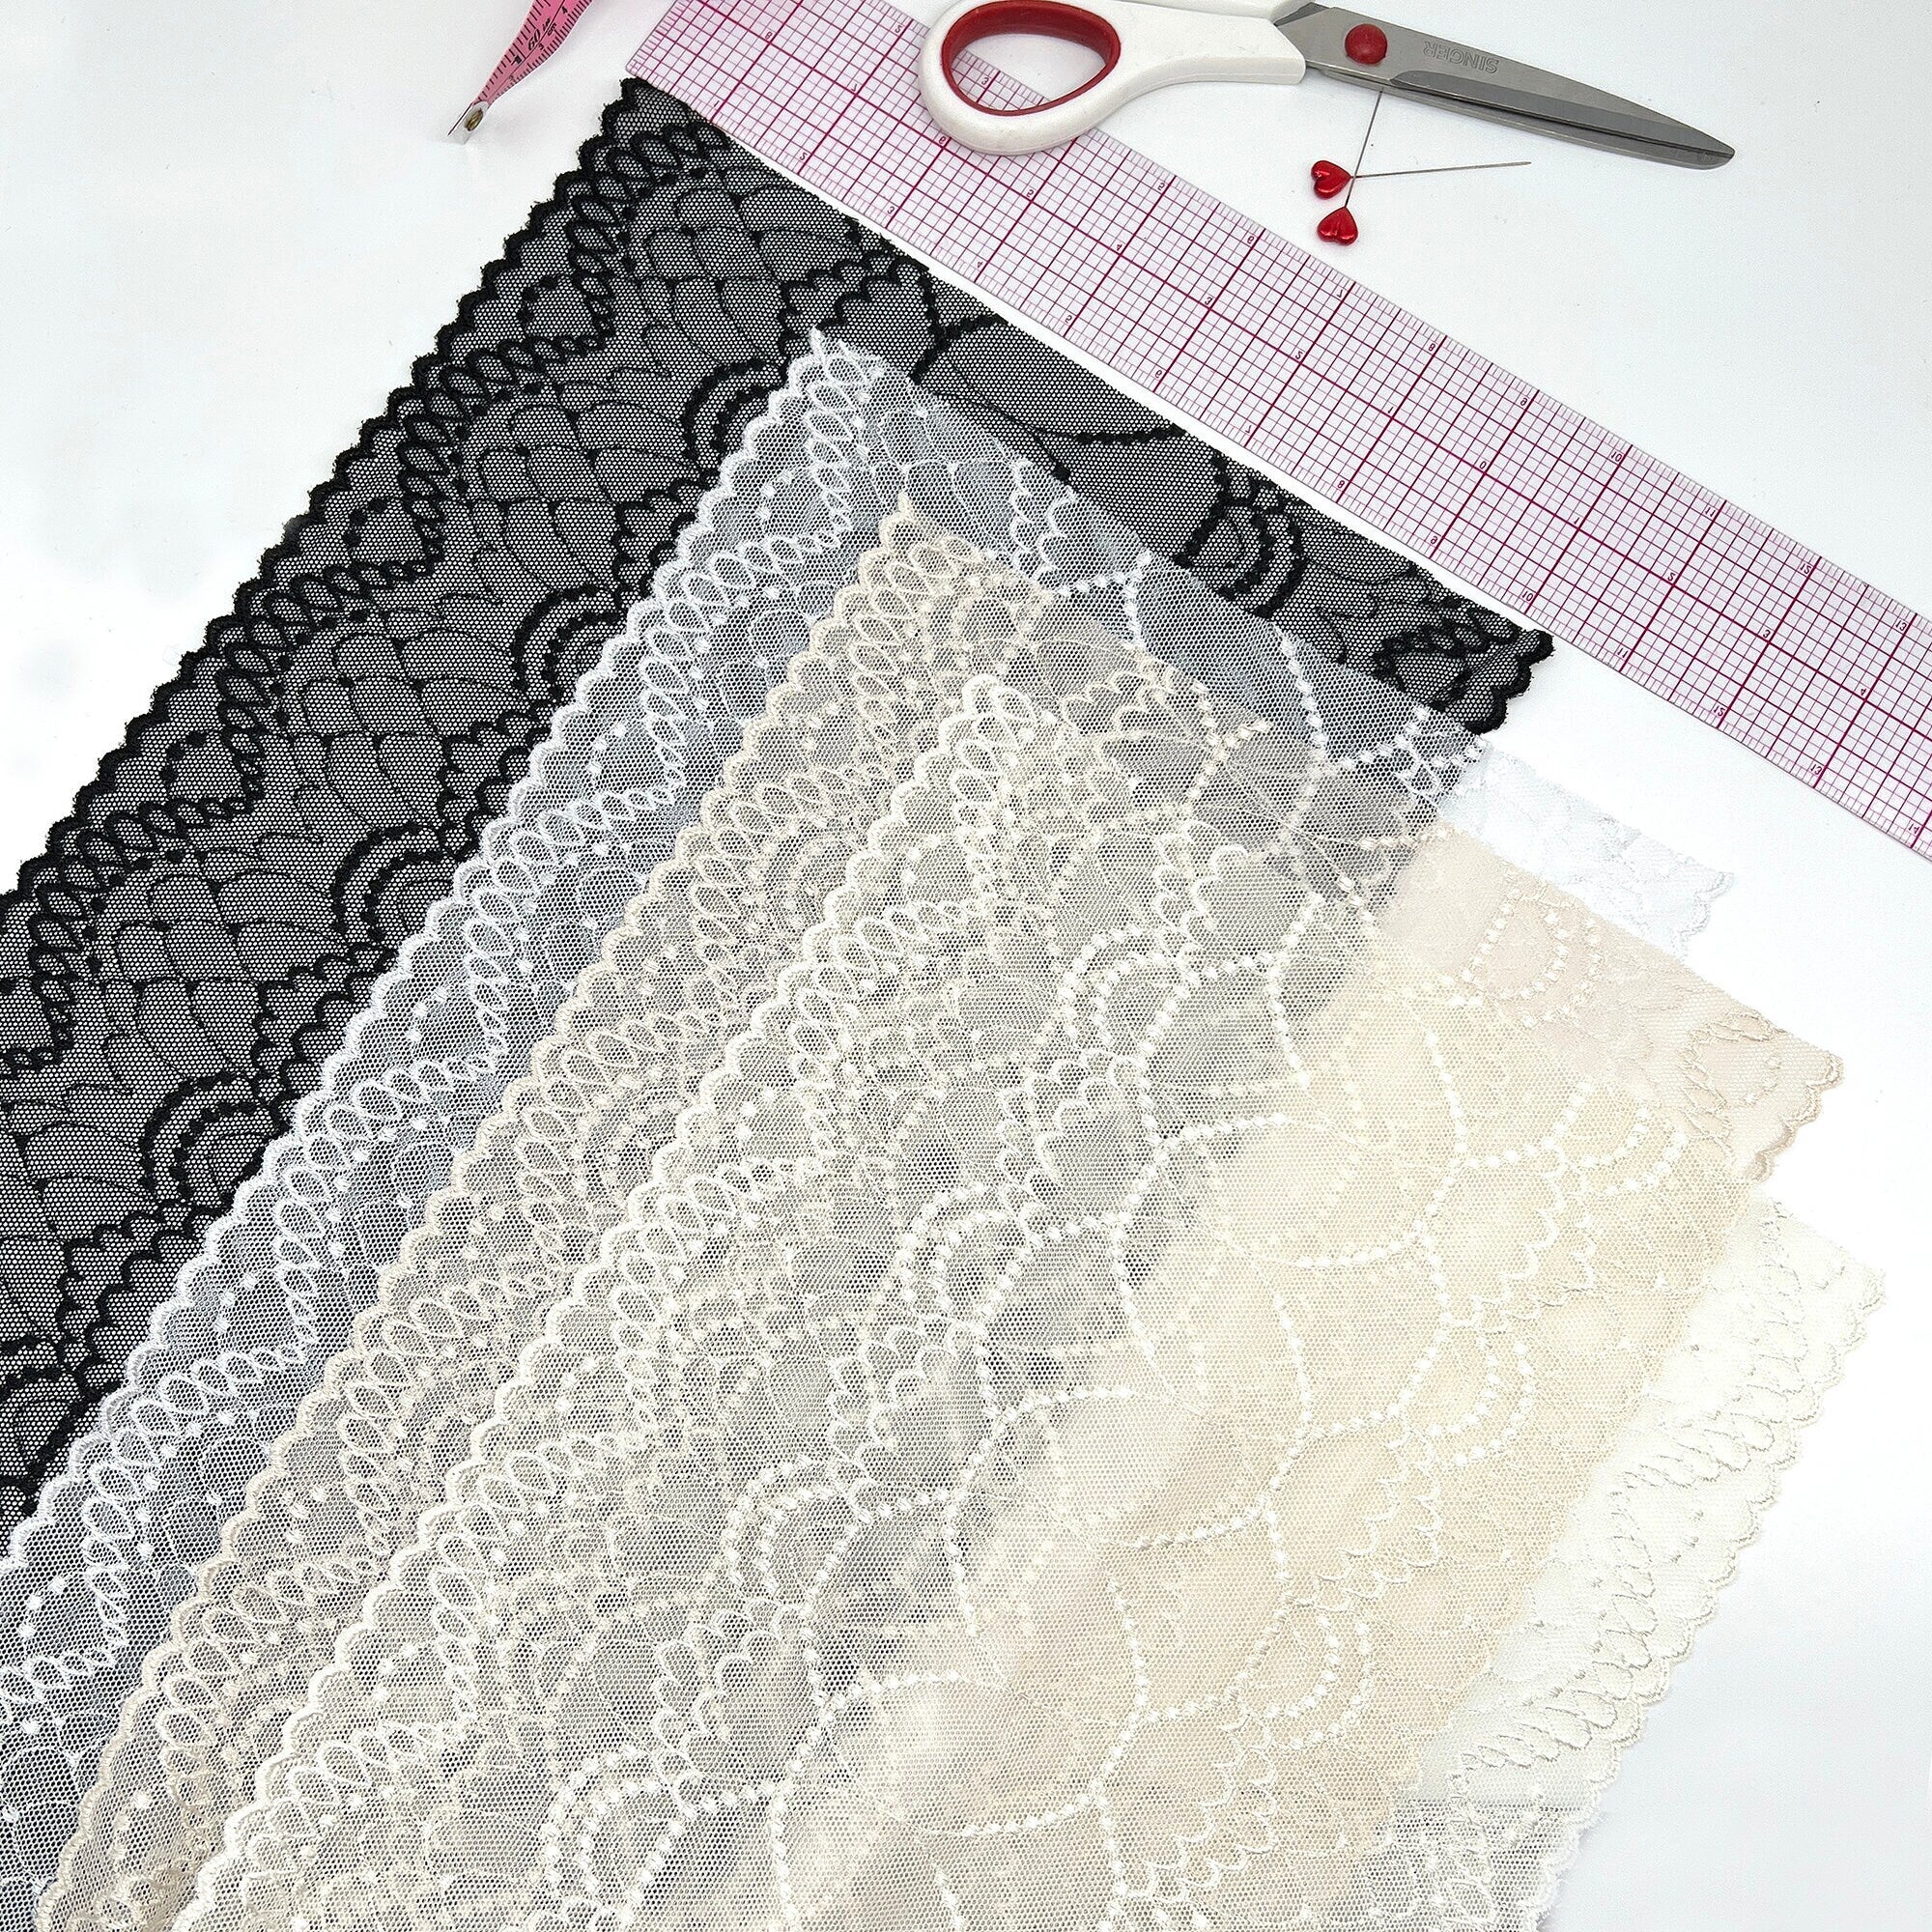 9.5" (24cm) Wide, Delicate Stretch Lace in Light Sand, Ivory, Black and White - 1 Yard-Stitch Love Studio